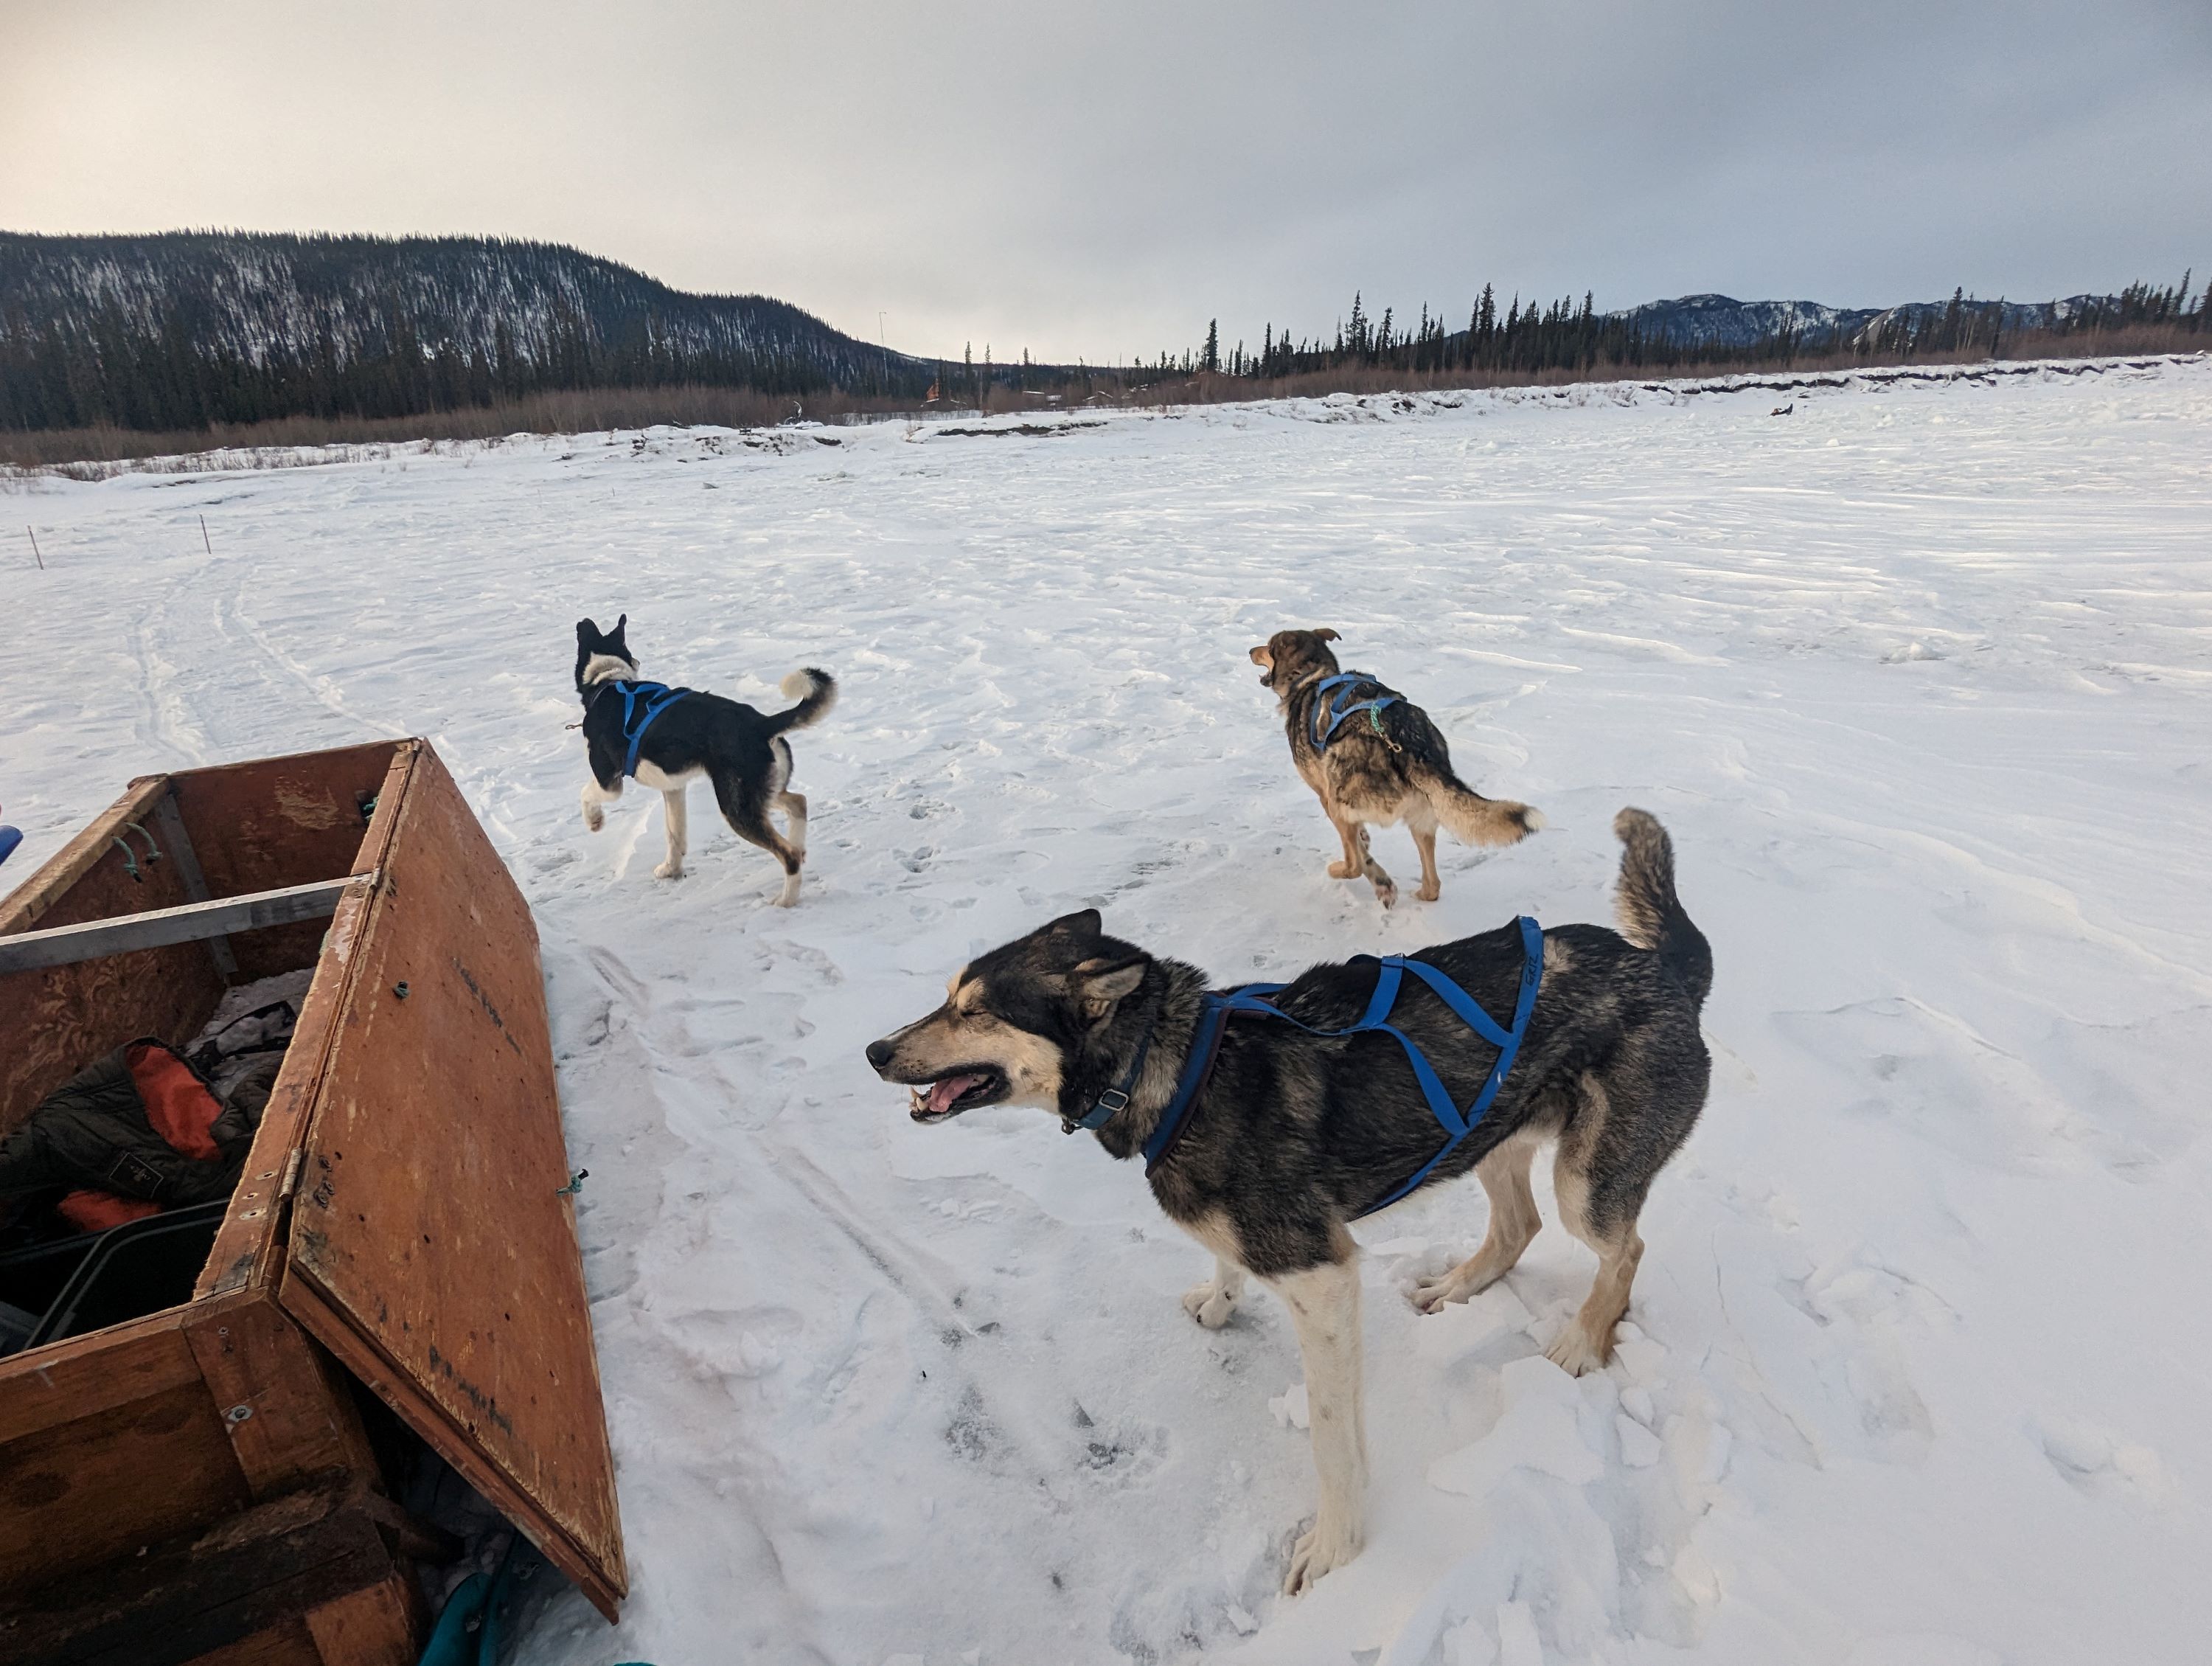 Sled dogs in harnesses wait on the frozen Yukon river